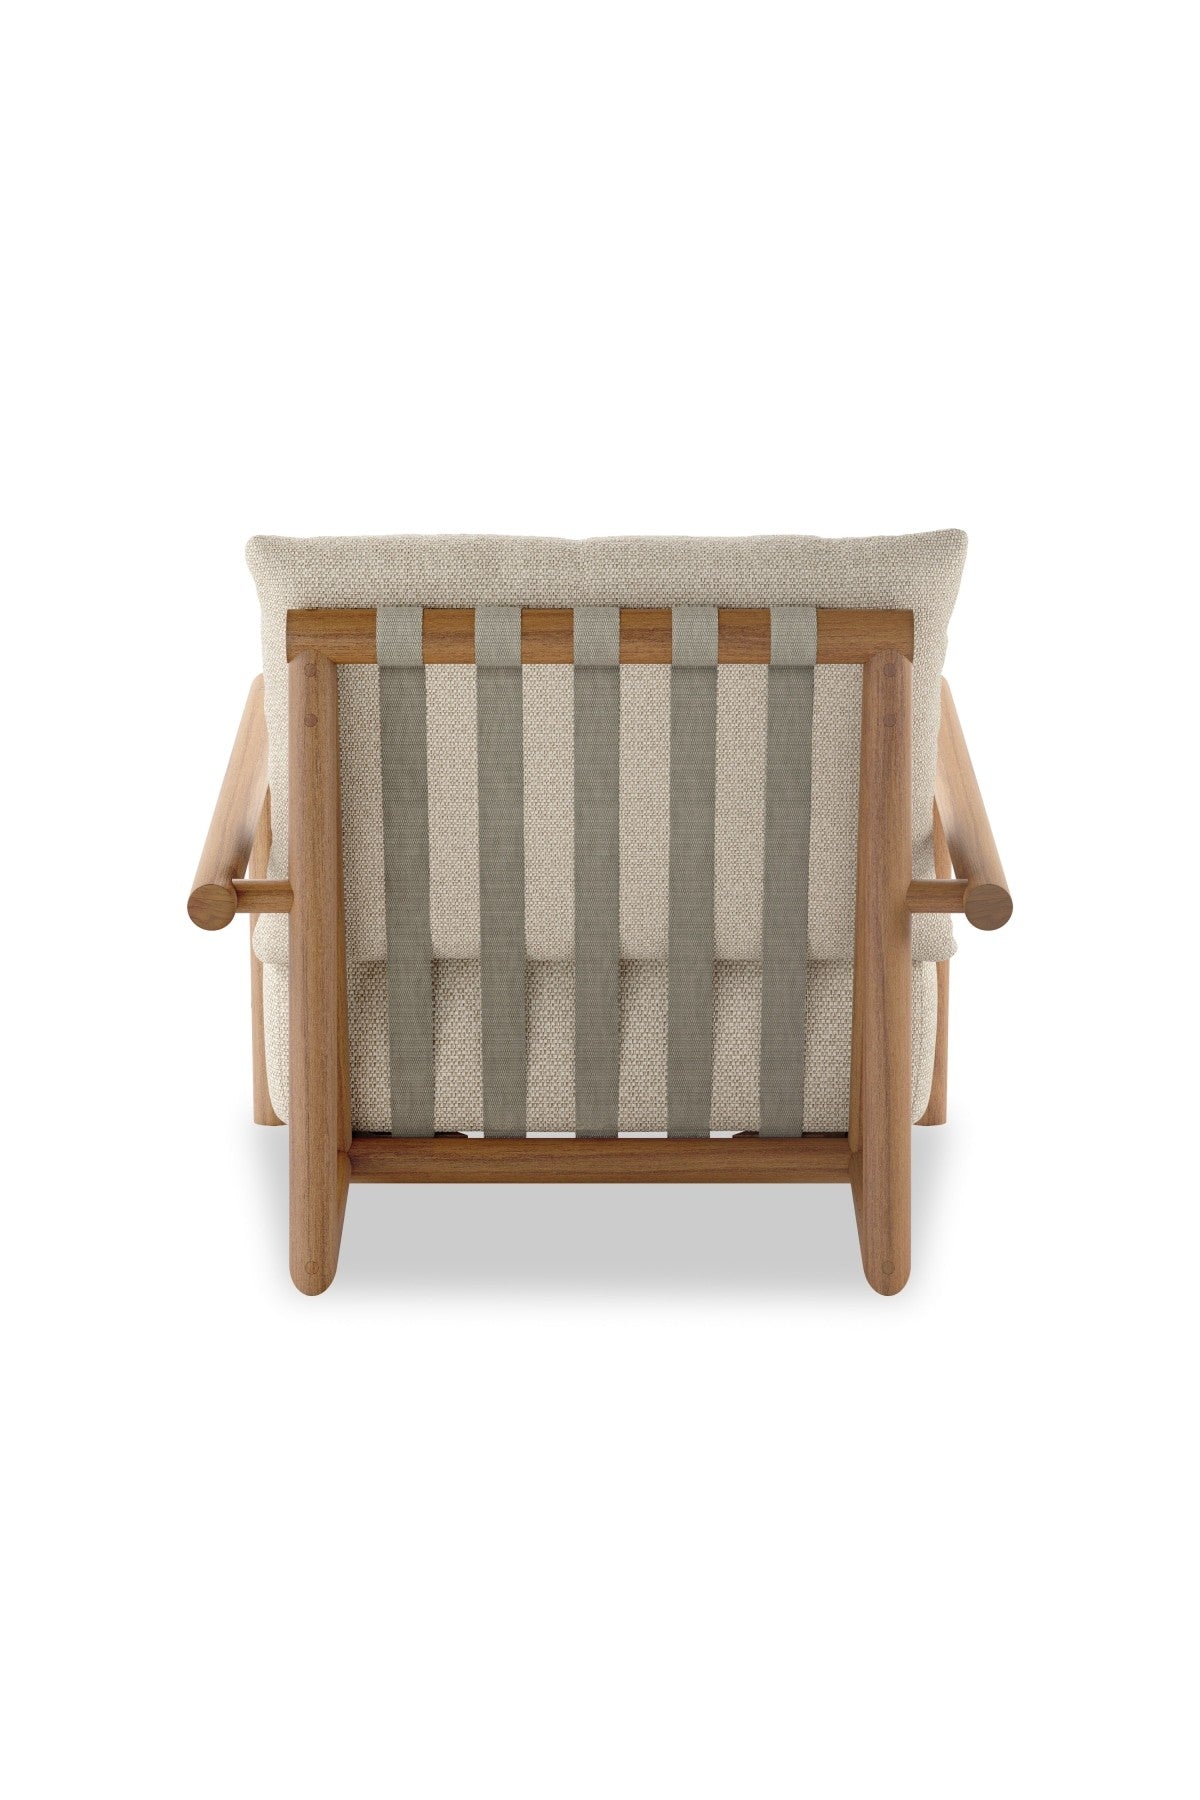 Cardley Outdoor Chair